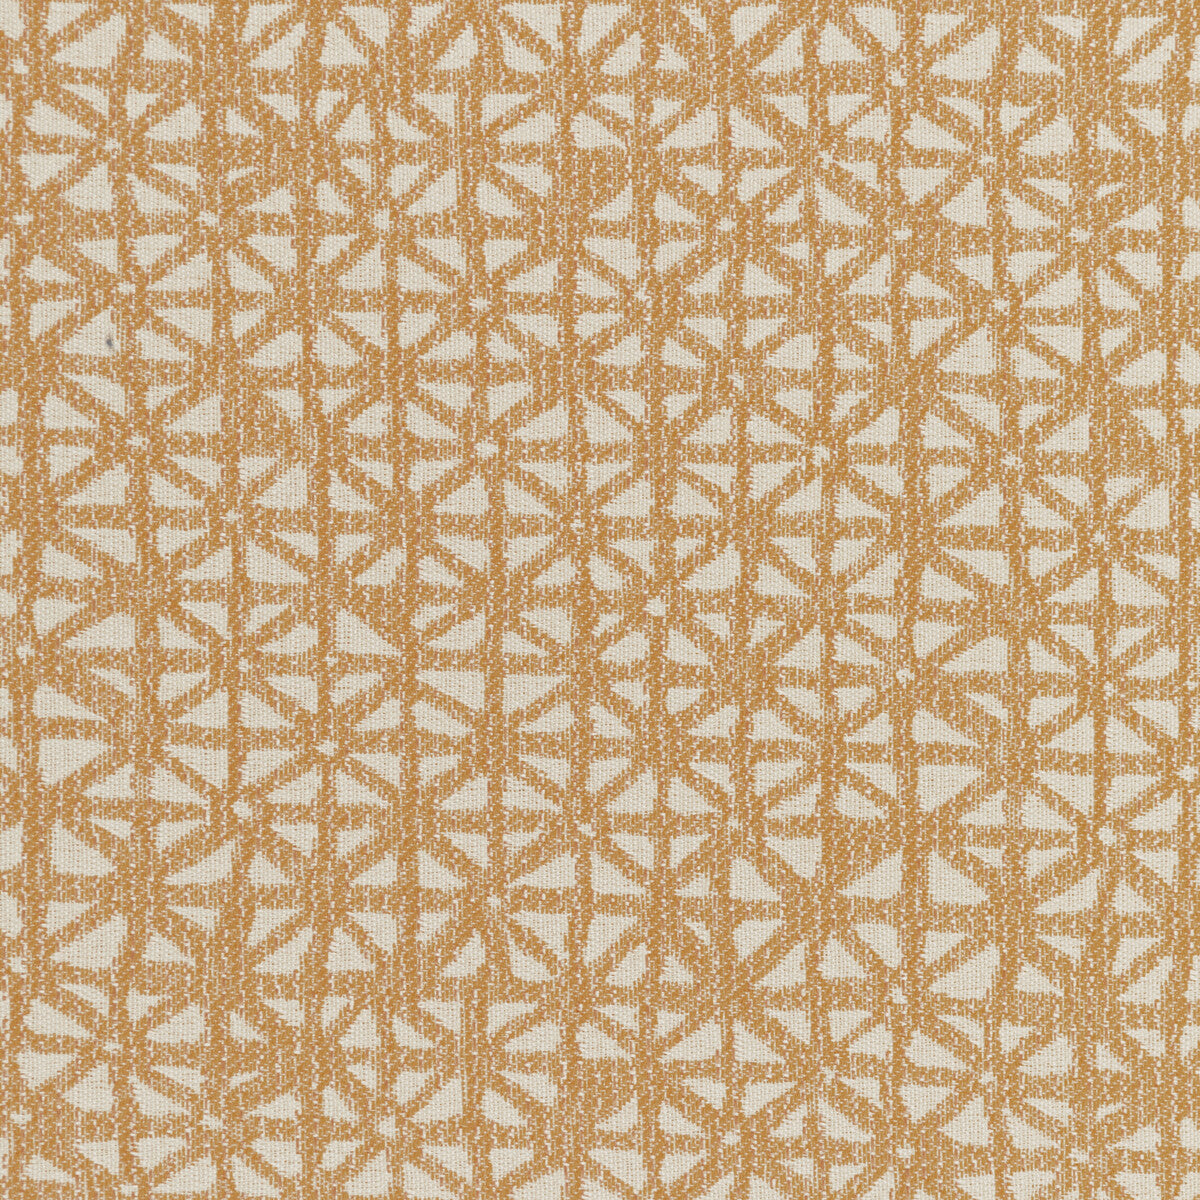 Kinzie fabric in goldenrod color - pattern 36268.4.0 - by Kravet Contract in the Gis Crypton collection